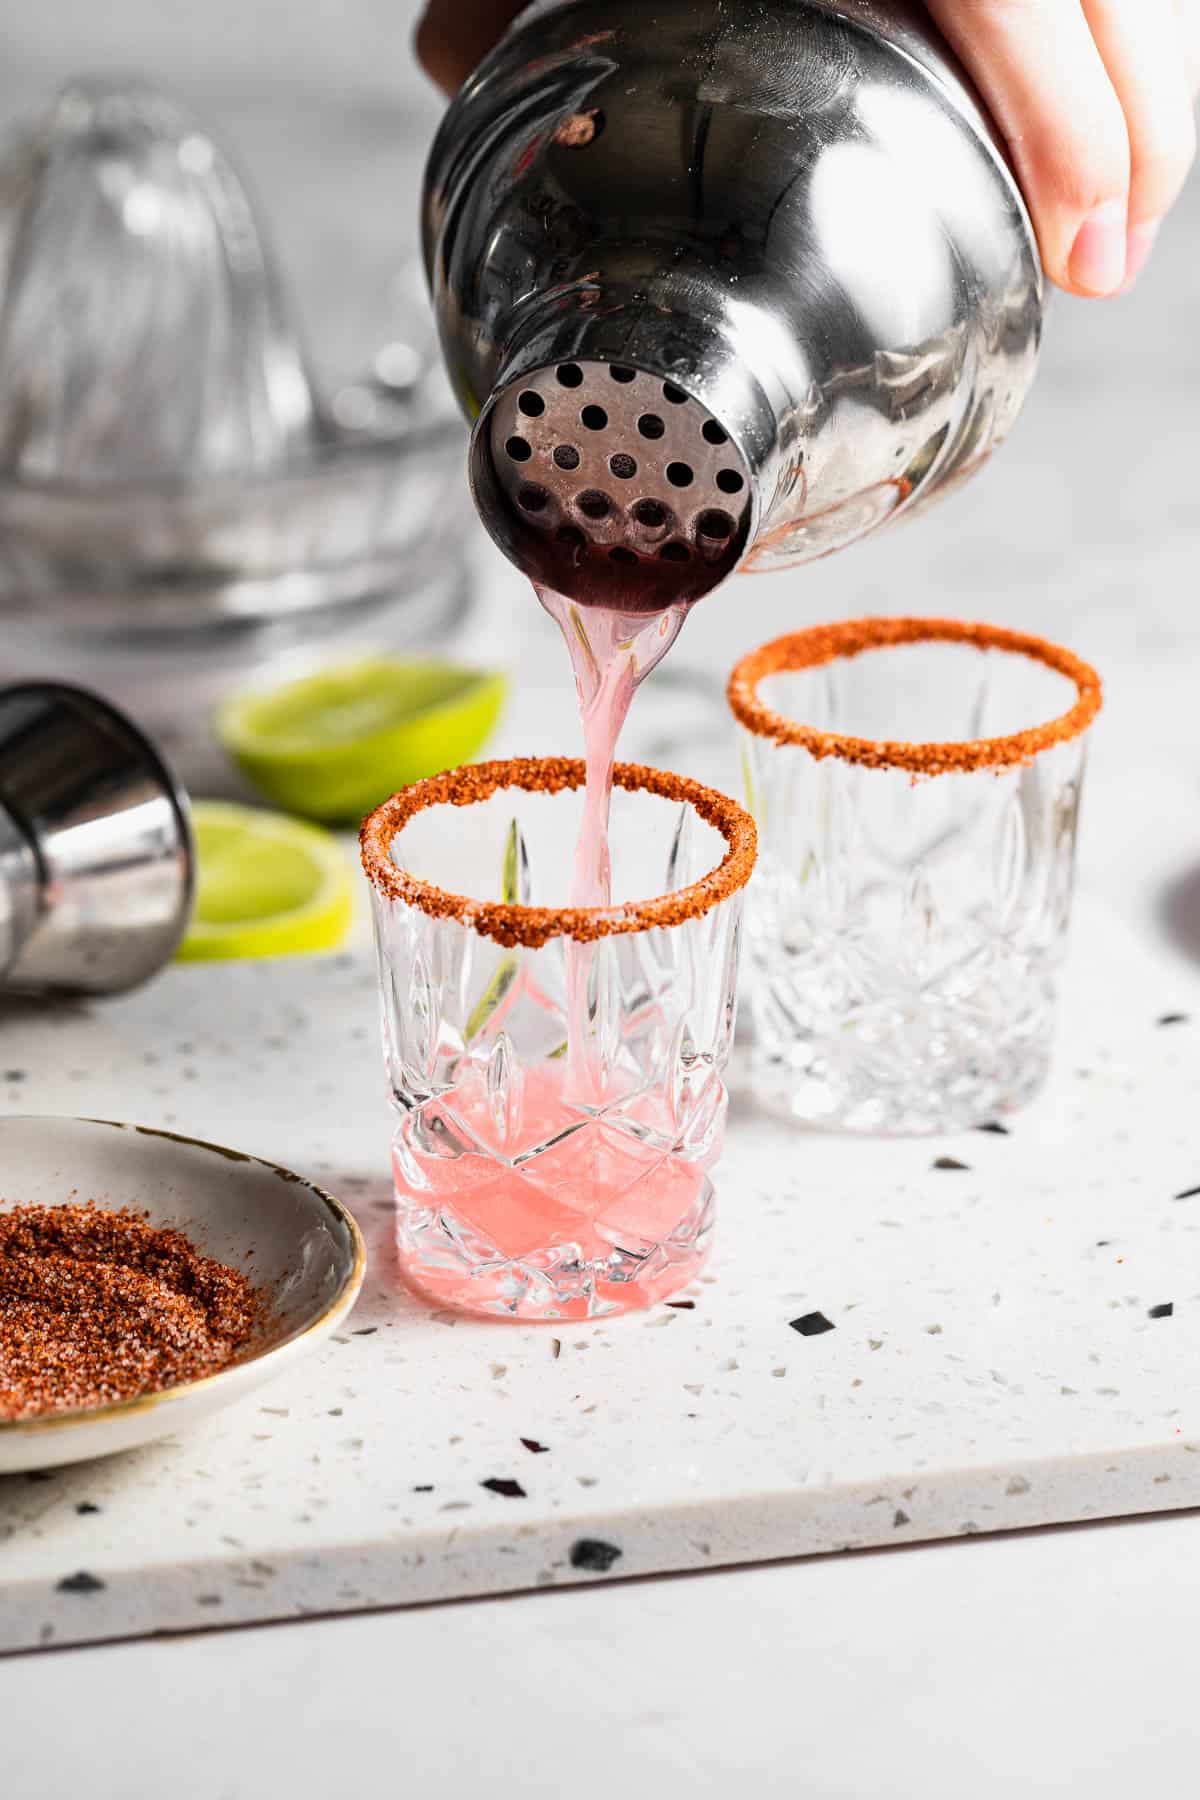 A pink liquor being poured into a Tajin rimmed shot glass with a second shot glass and other ingredients around it.